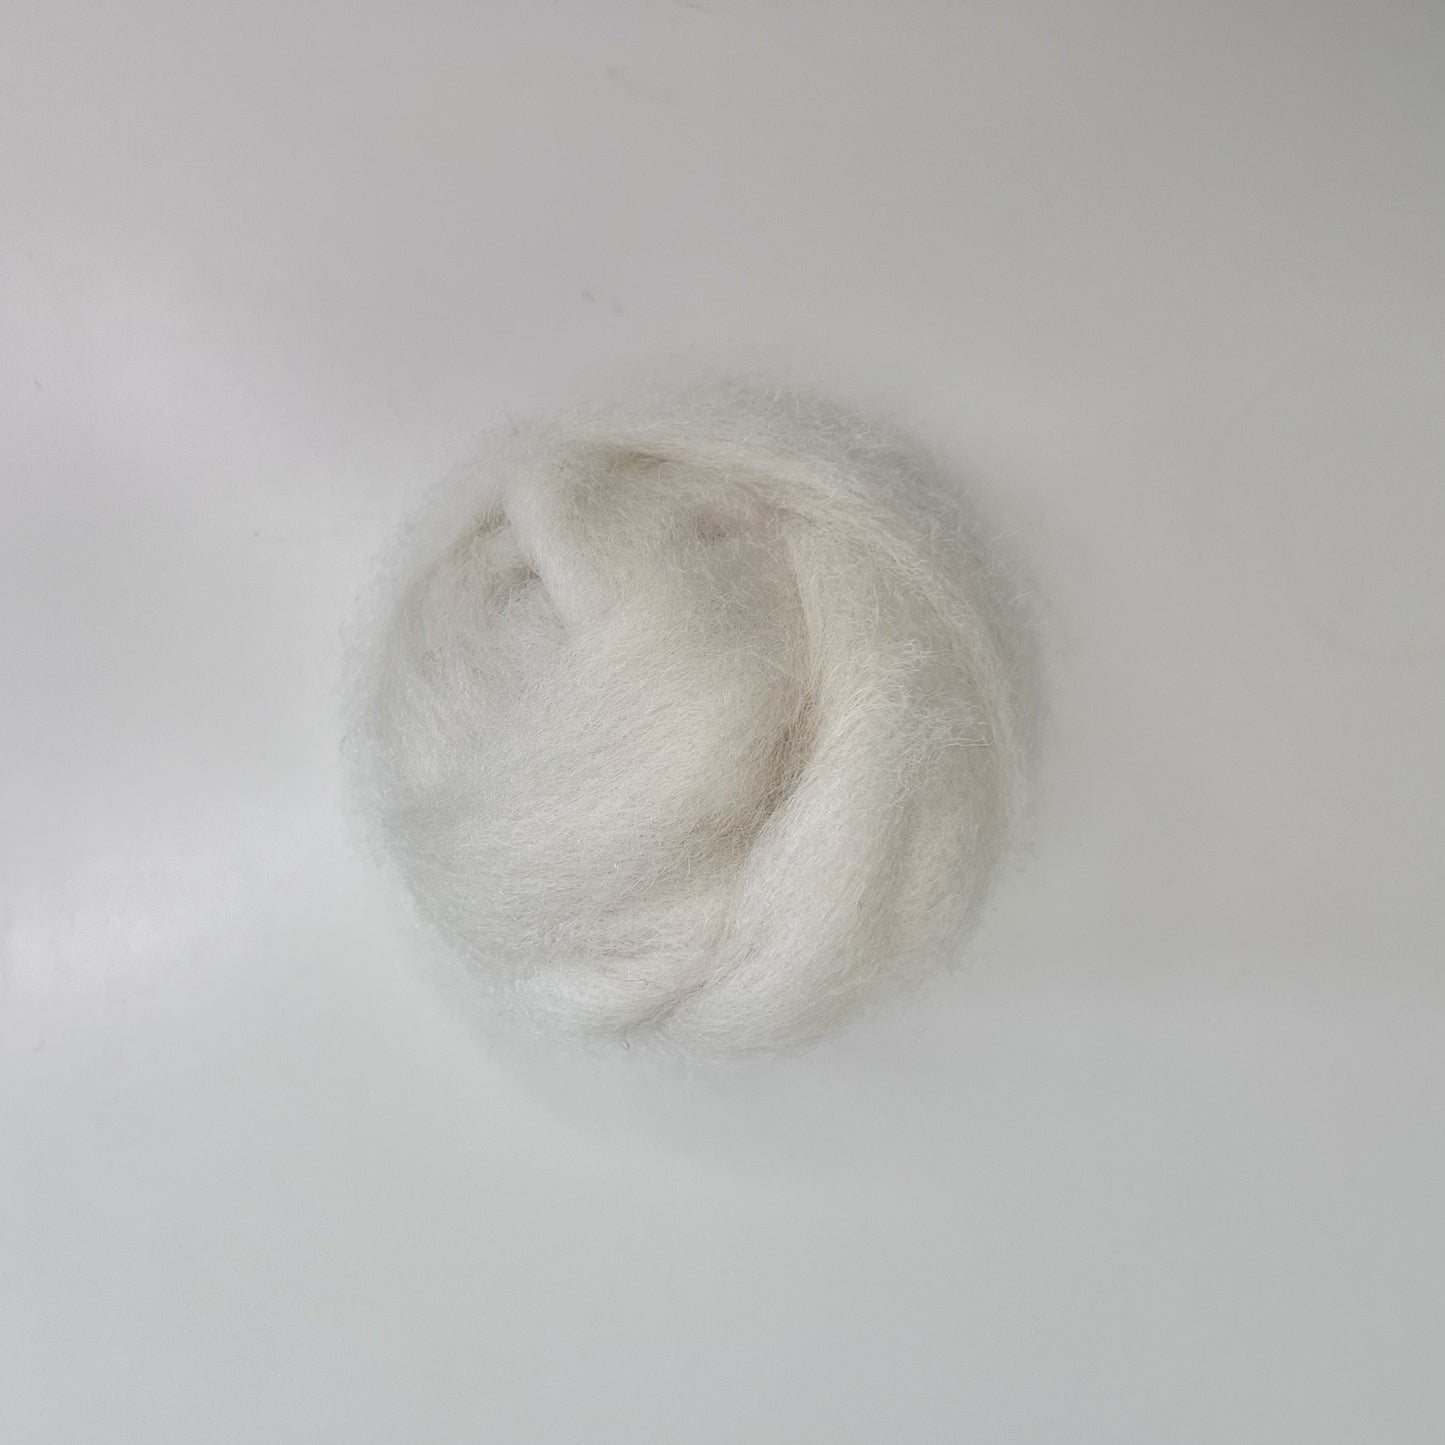 Romney wool un-dyed (50 & 100g) 4 colours available